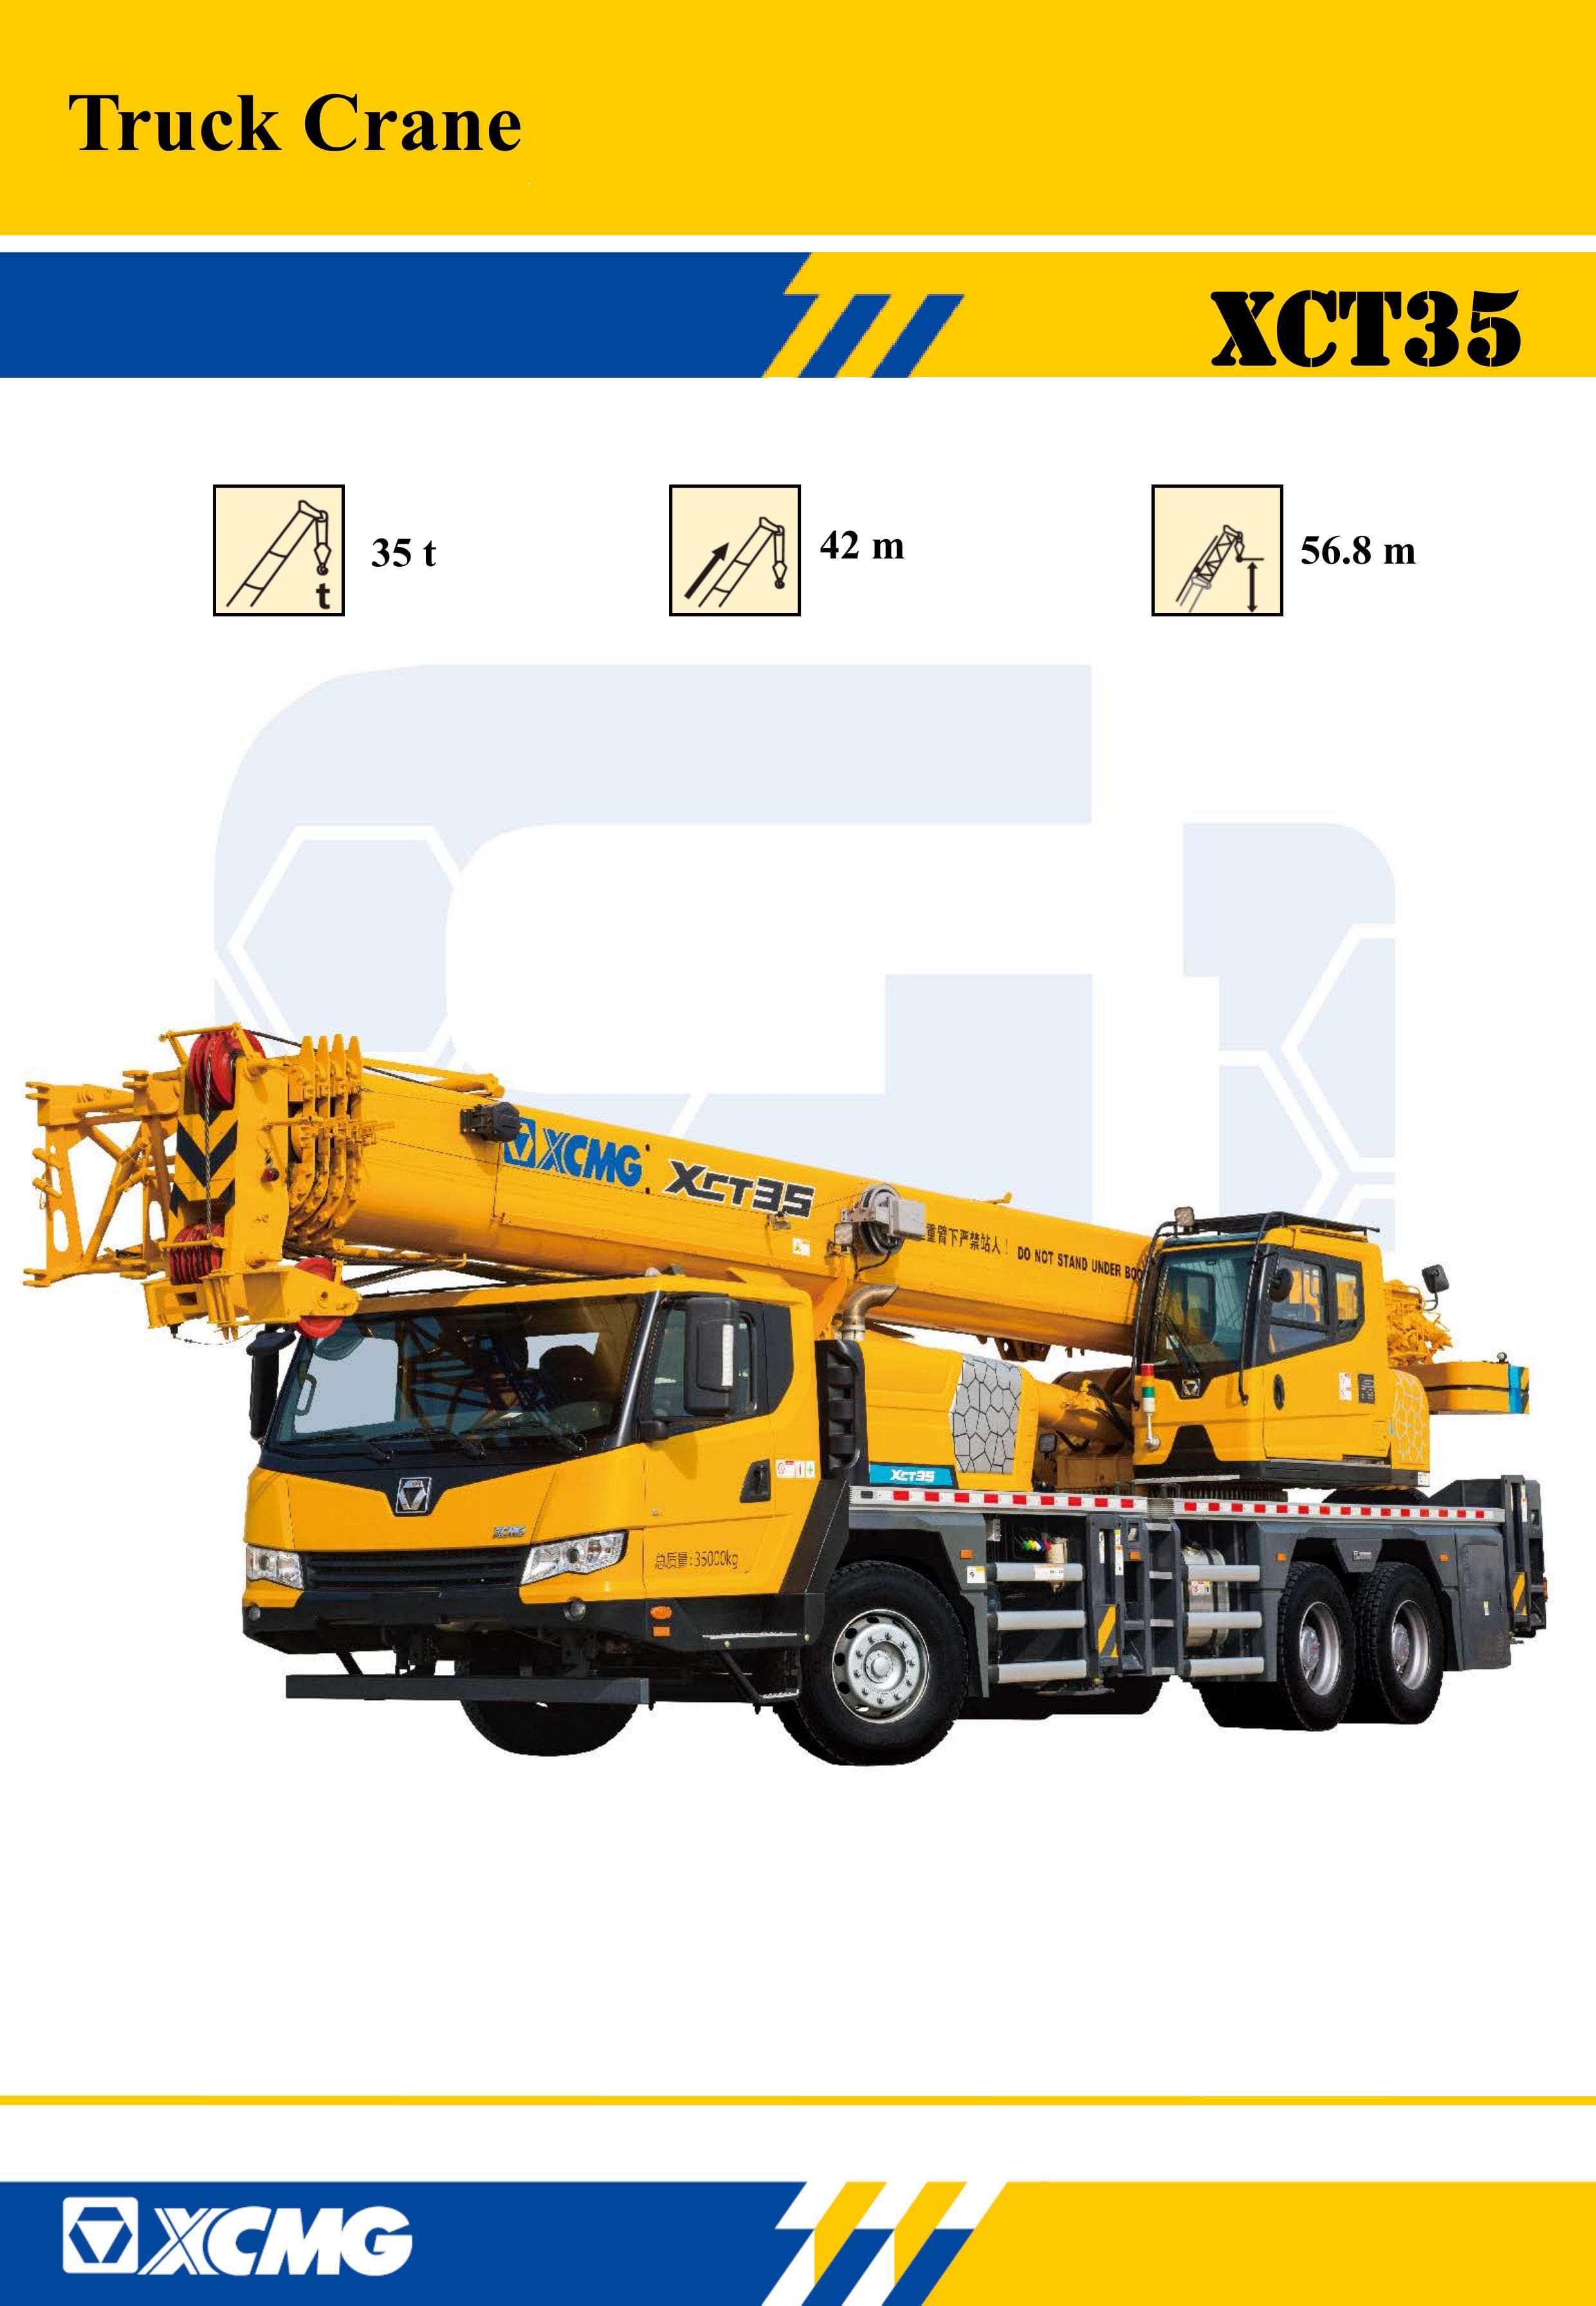 XCMG Official XCT35 Truck Crane for sale